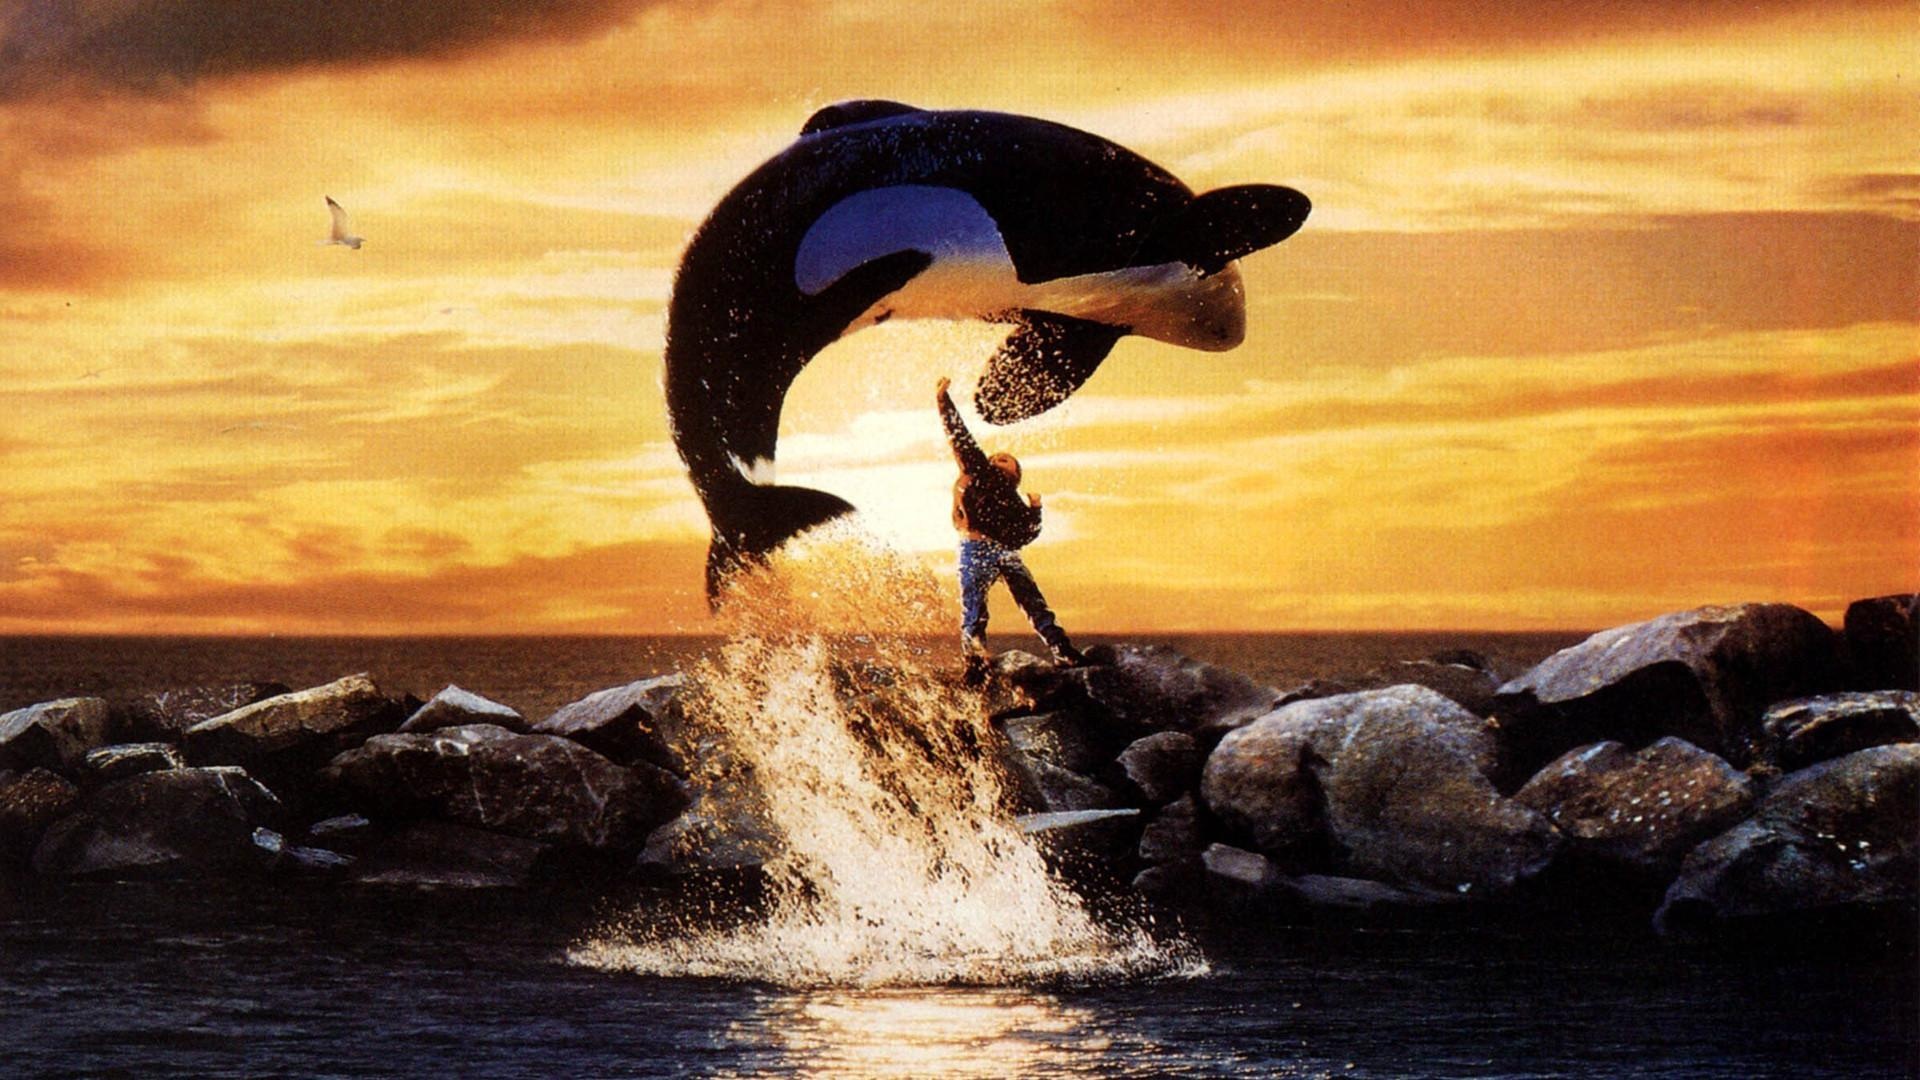 Free Willy 2 movie, Adventure home, Wallpapers, Movies, 1920x1080 Full HD Desktop